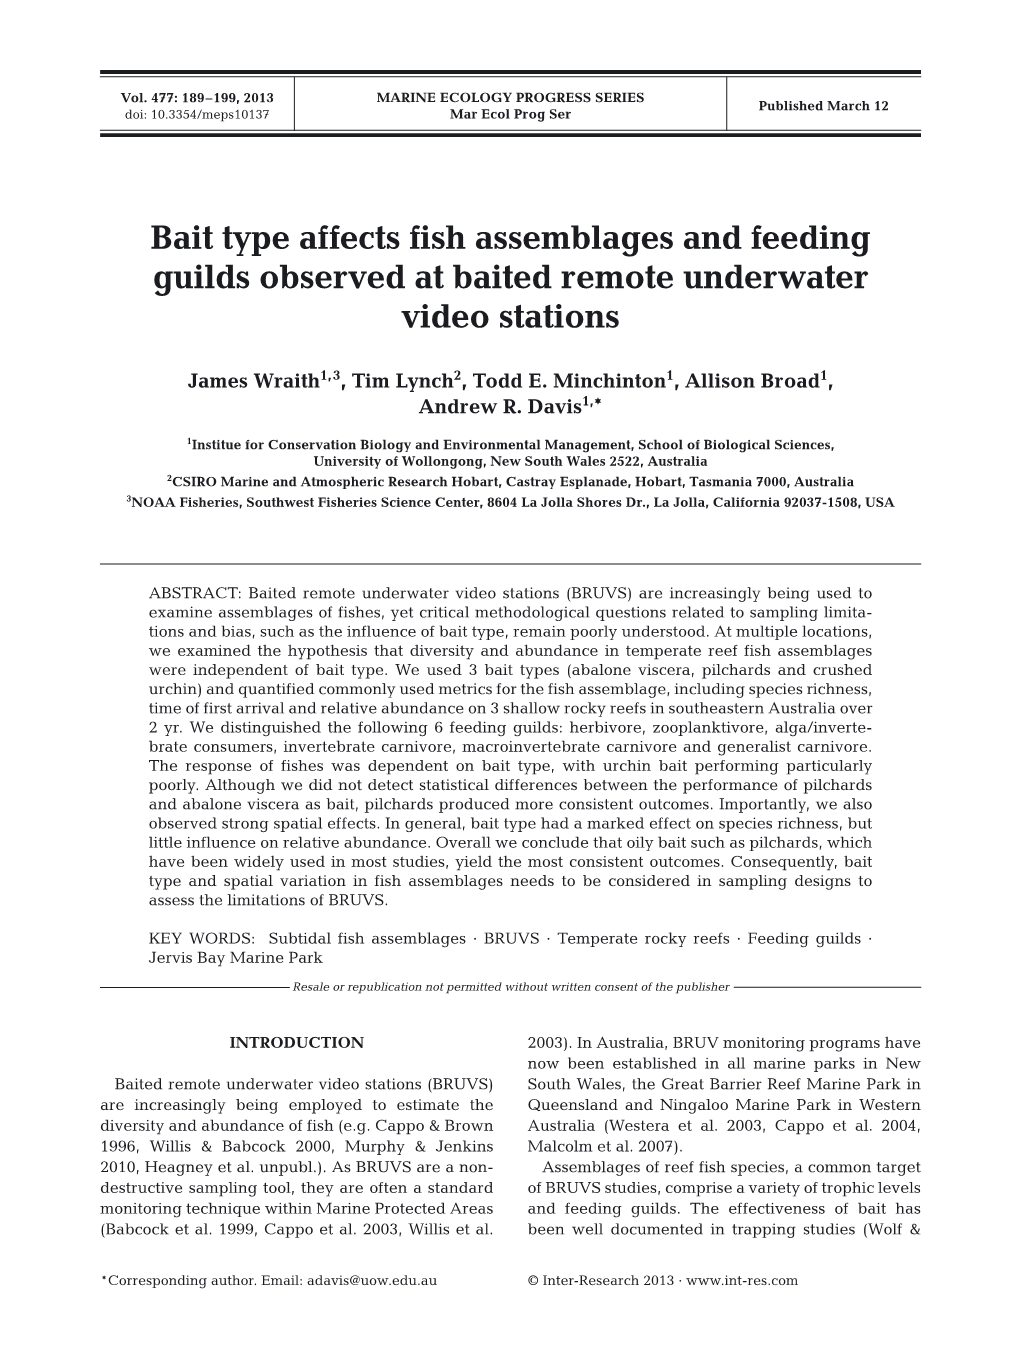 Bait Type Affects Fish Assemblages and Feeding Guilds Observed at Baited Remote Underwater Video Stations